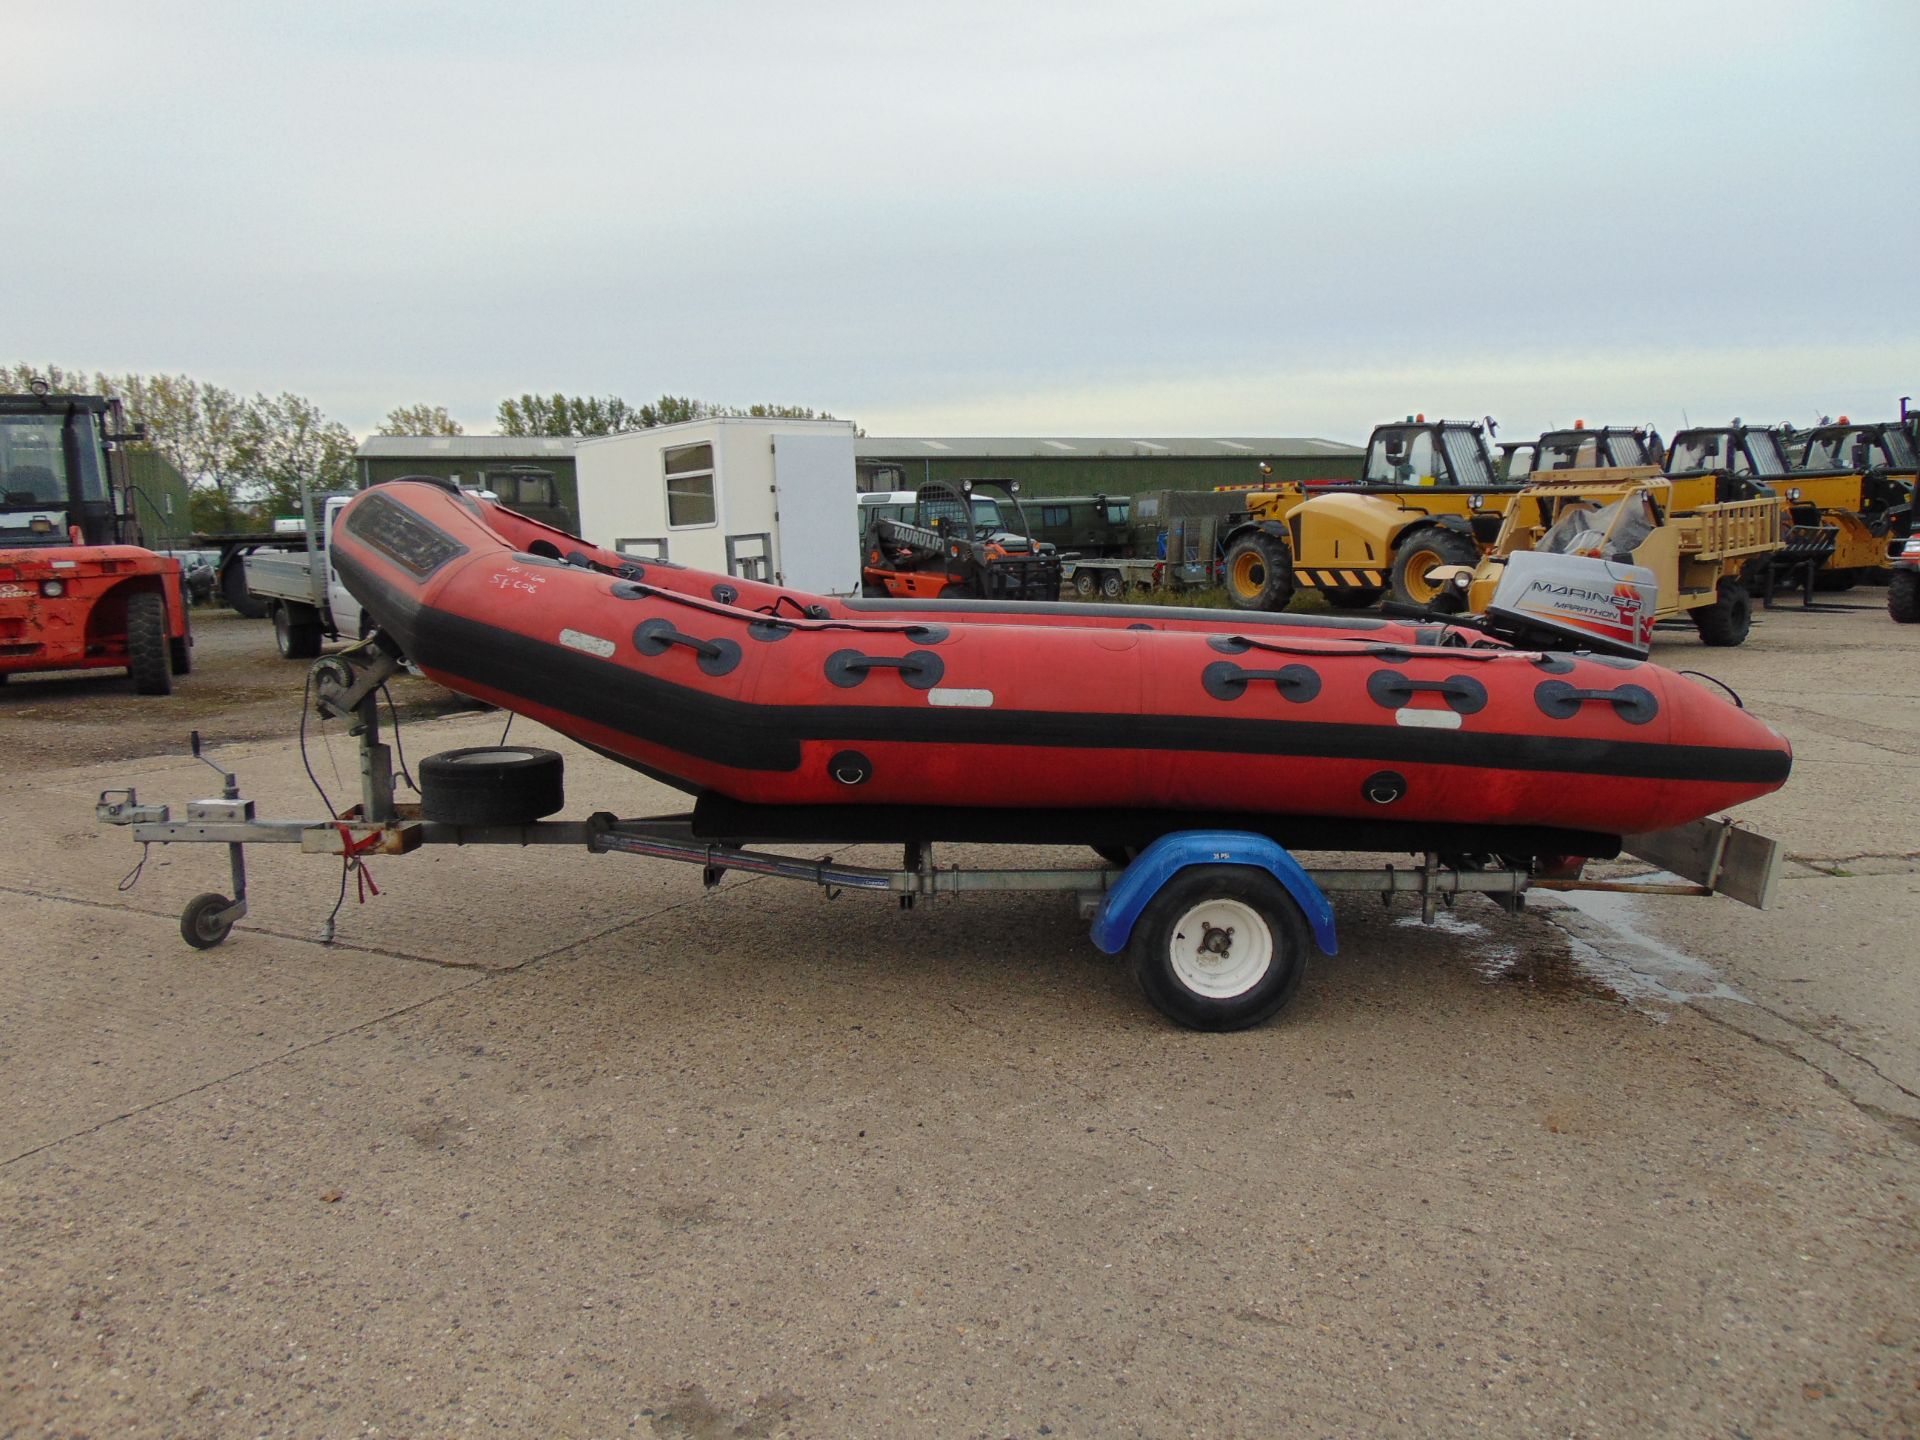 Eurocraft 440 Inflatable Rib C/W Mariner Outboard Motor and Transportation Trailer - Image 7 of 26